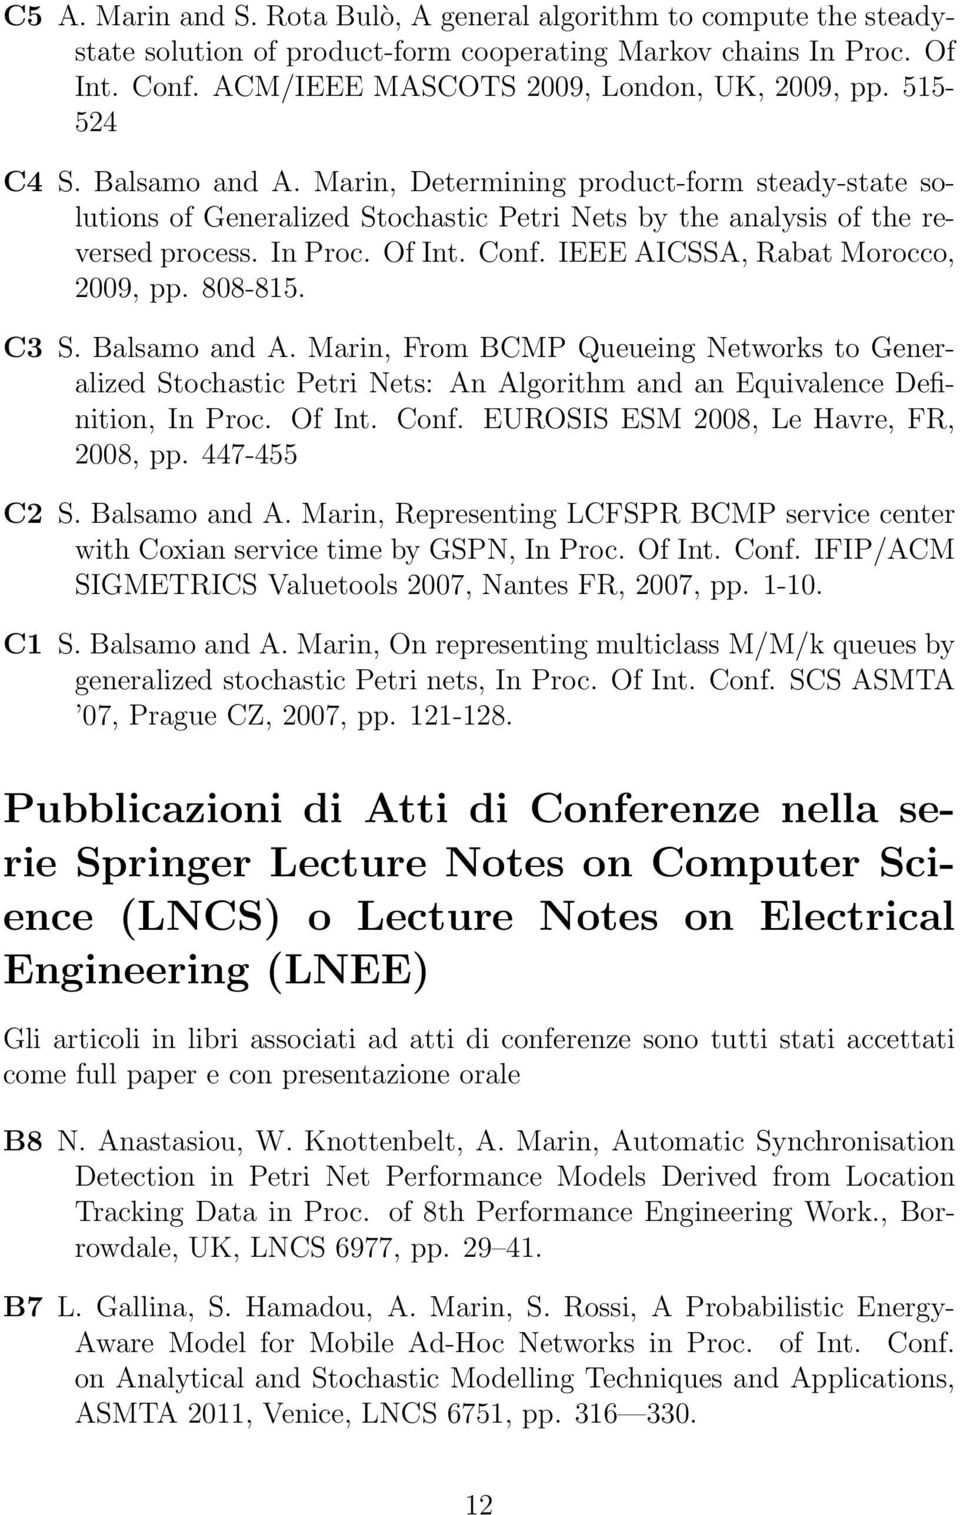 IEEE AICSSA, Rabat Morocco, 2009, pp. 808-815. C3 S. Balsamo and A. Marin, From BCMP Queueing Networks to Generalized Stochastic Petri Nets: An Algorithm and an Equivalence Definition, In Proc.